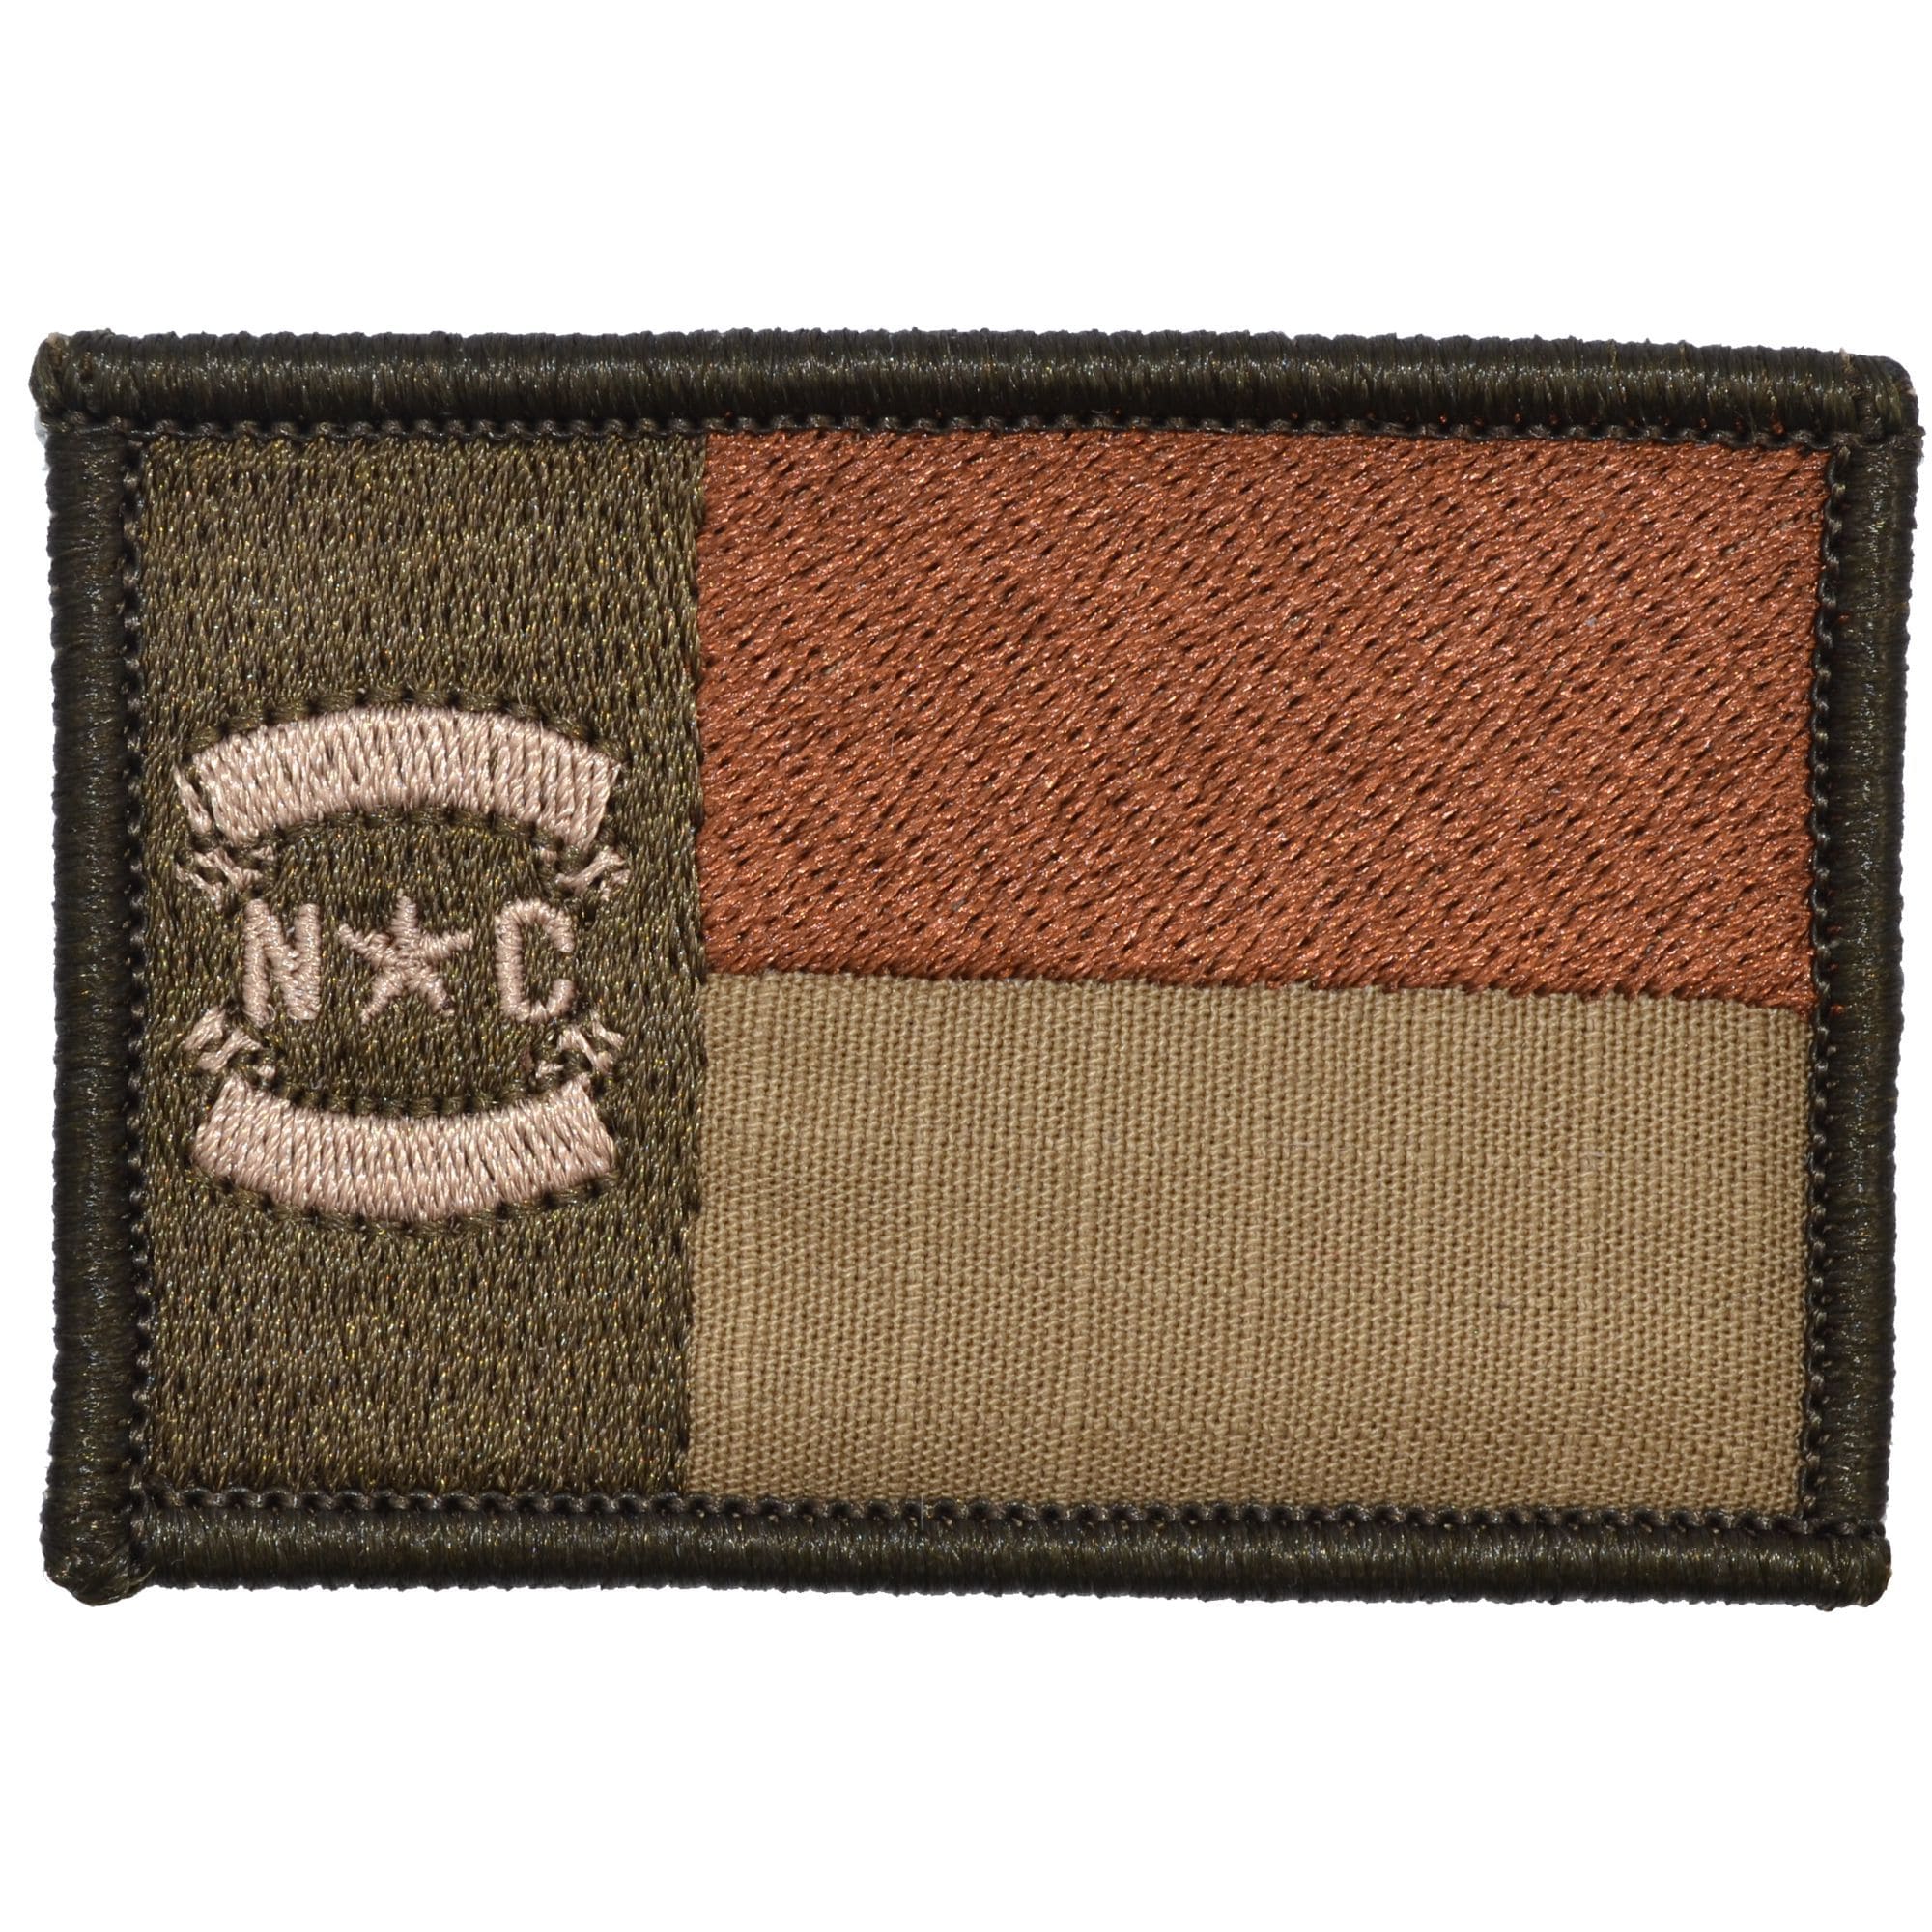 Tactical Gear Junkie Patches Coyote Brown North Carolina State Flag - 2x3 Patch